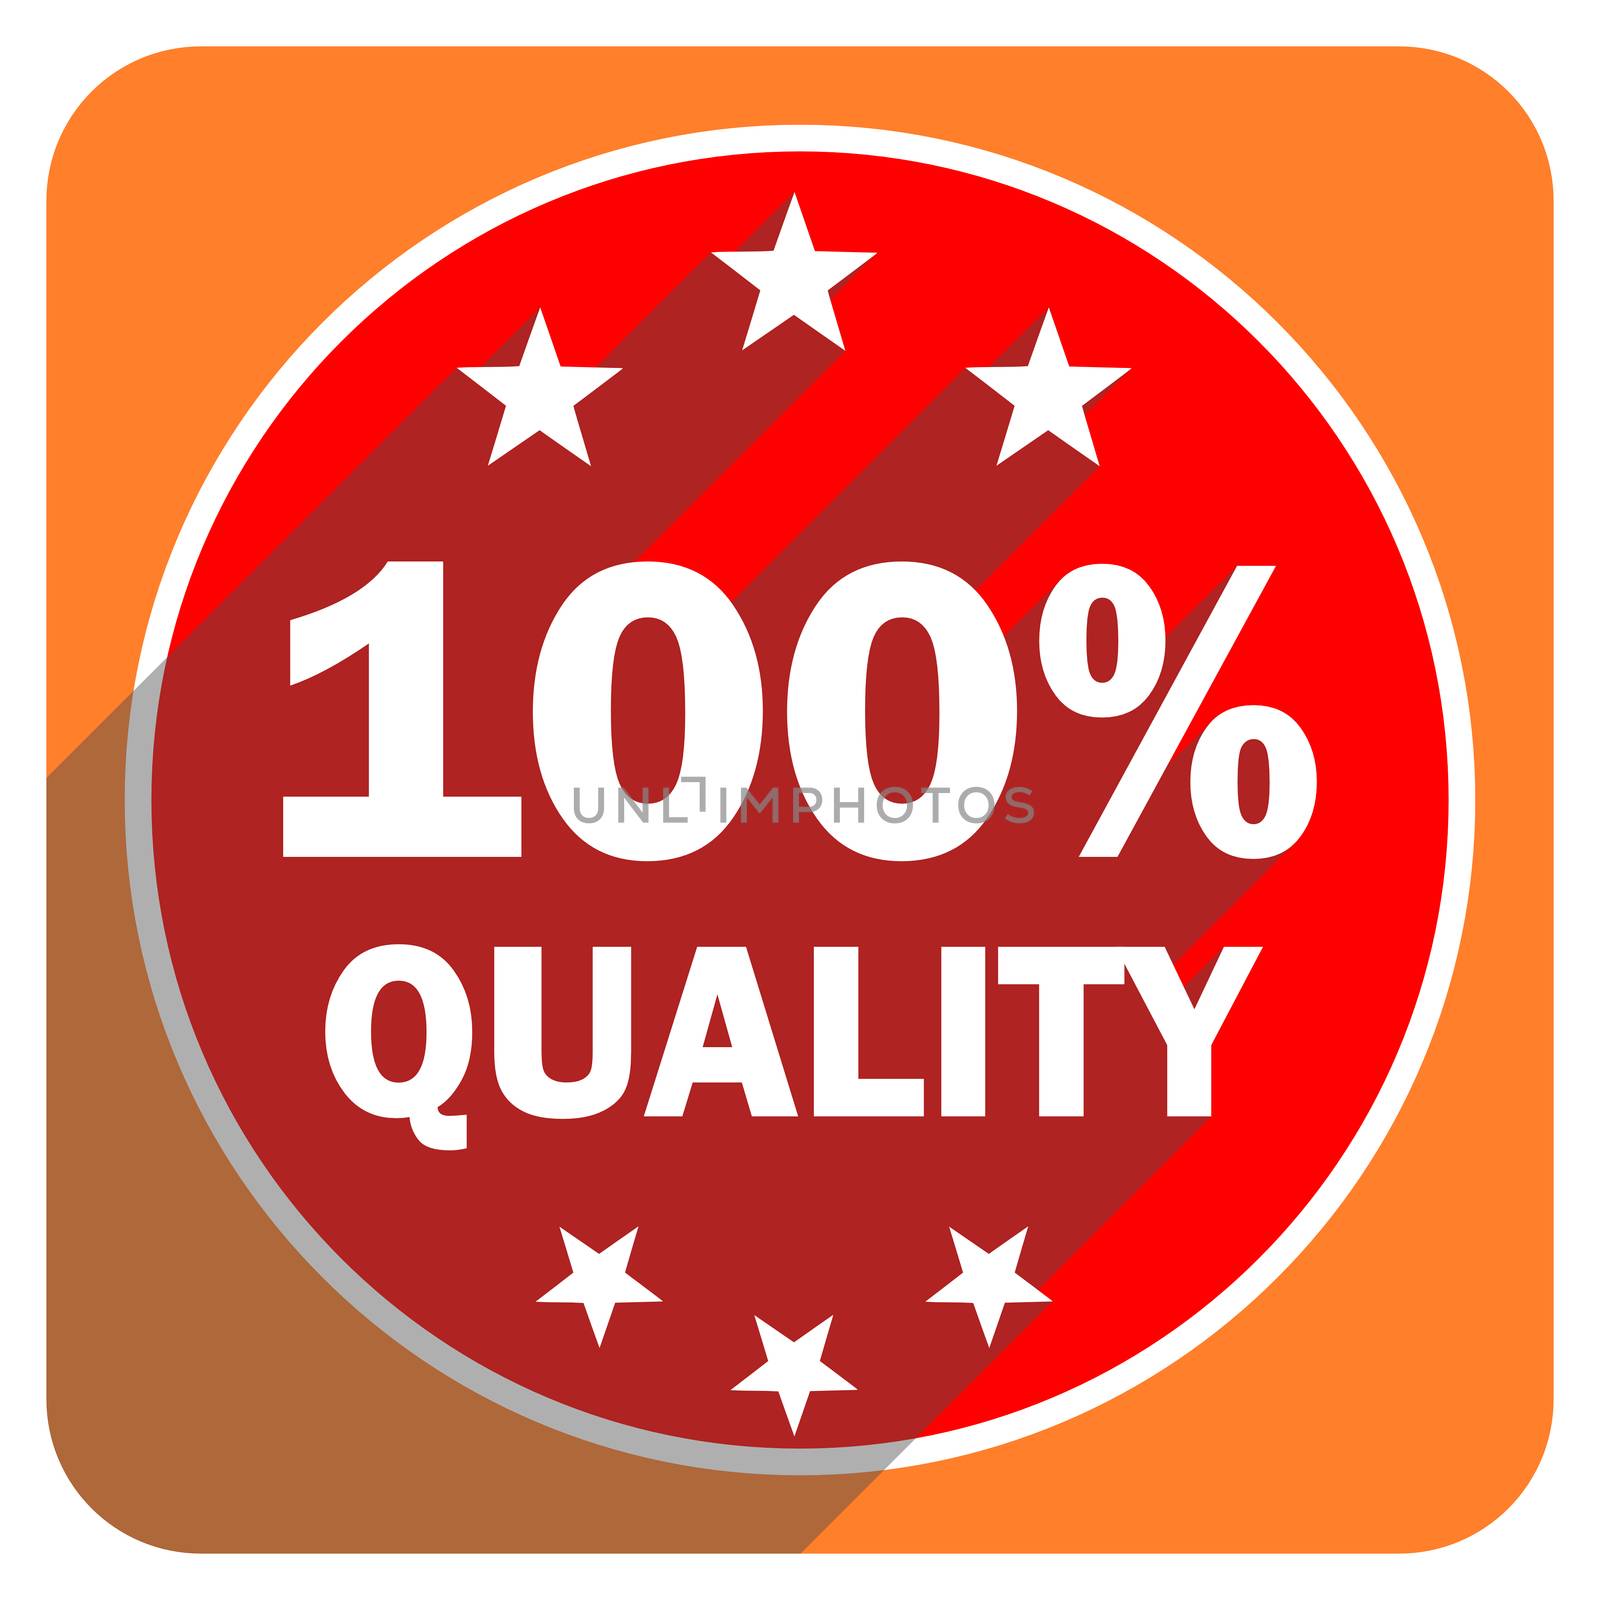 quality red flat icon isolated